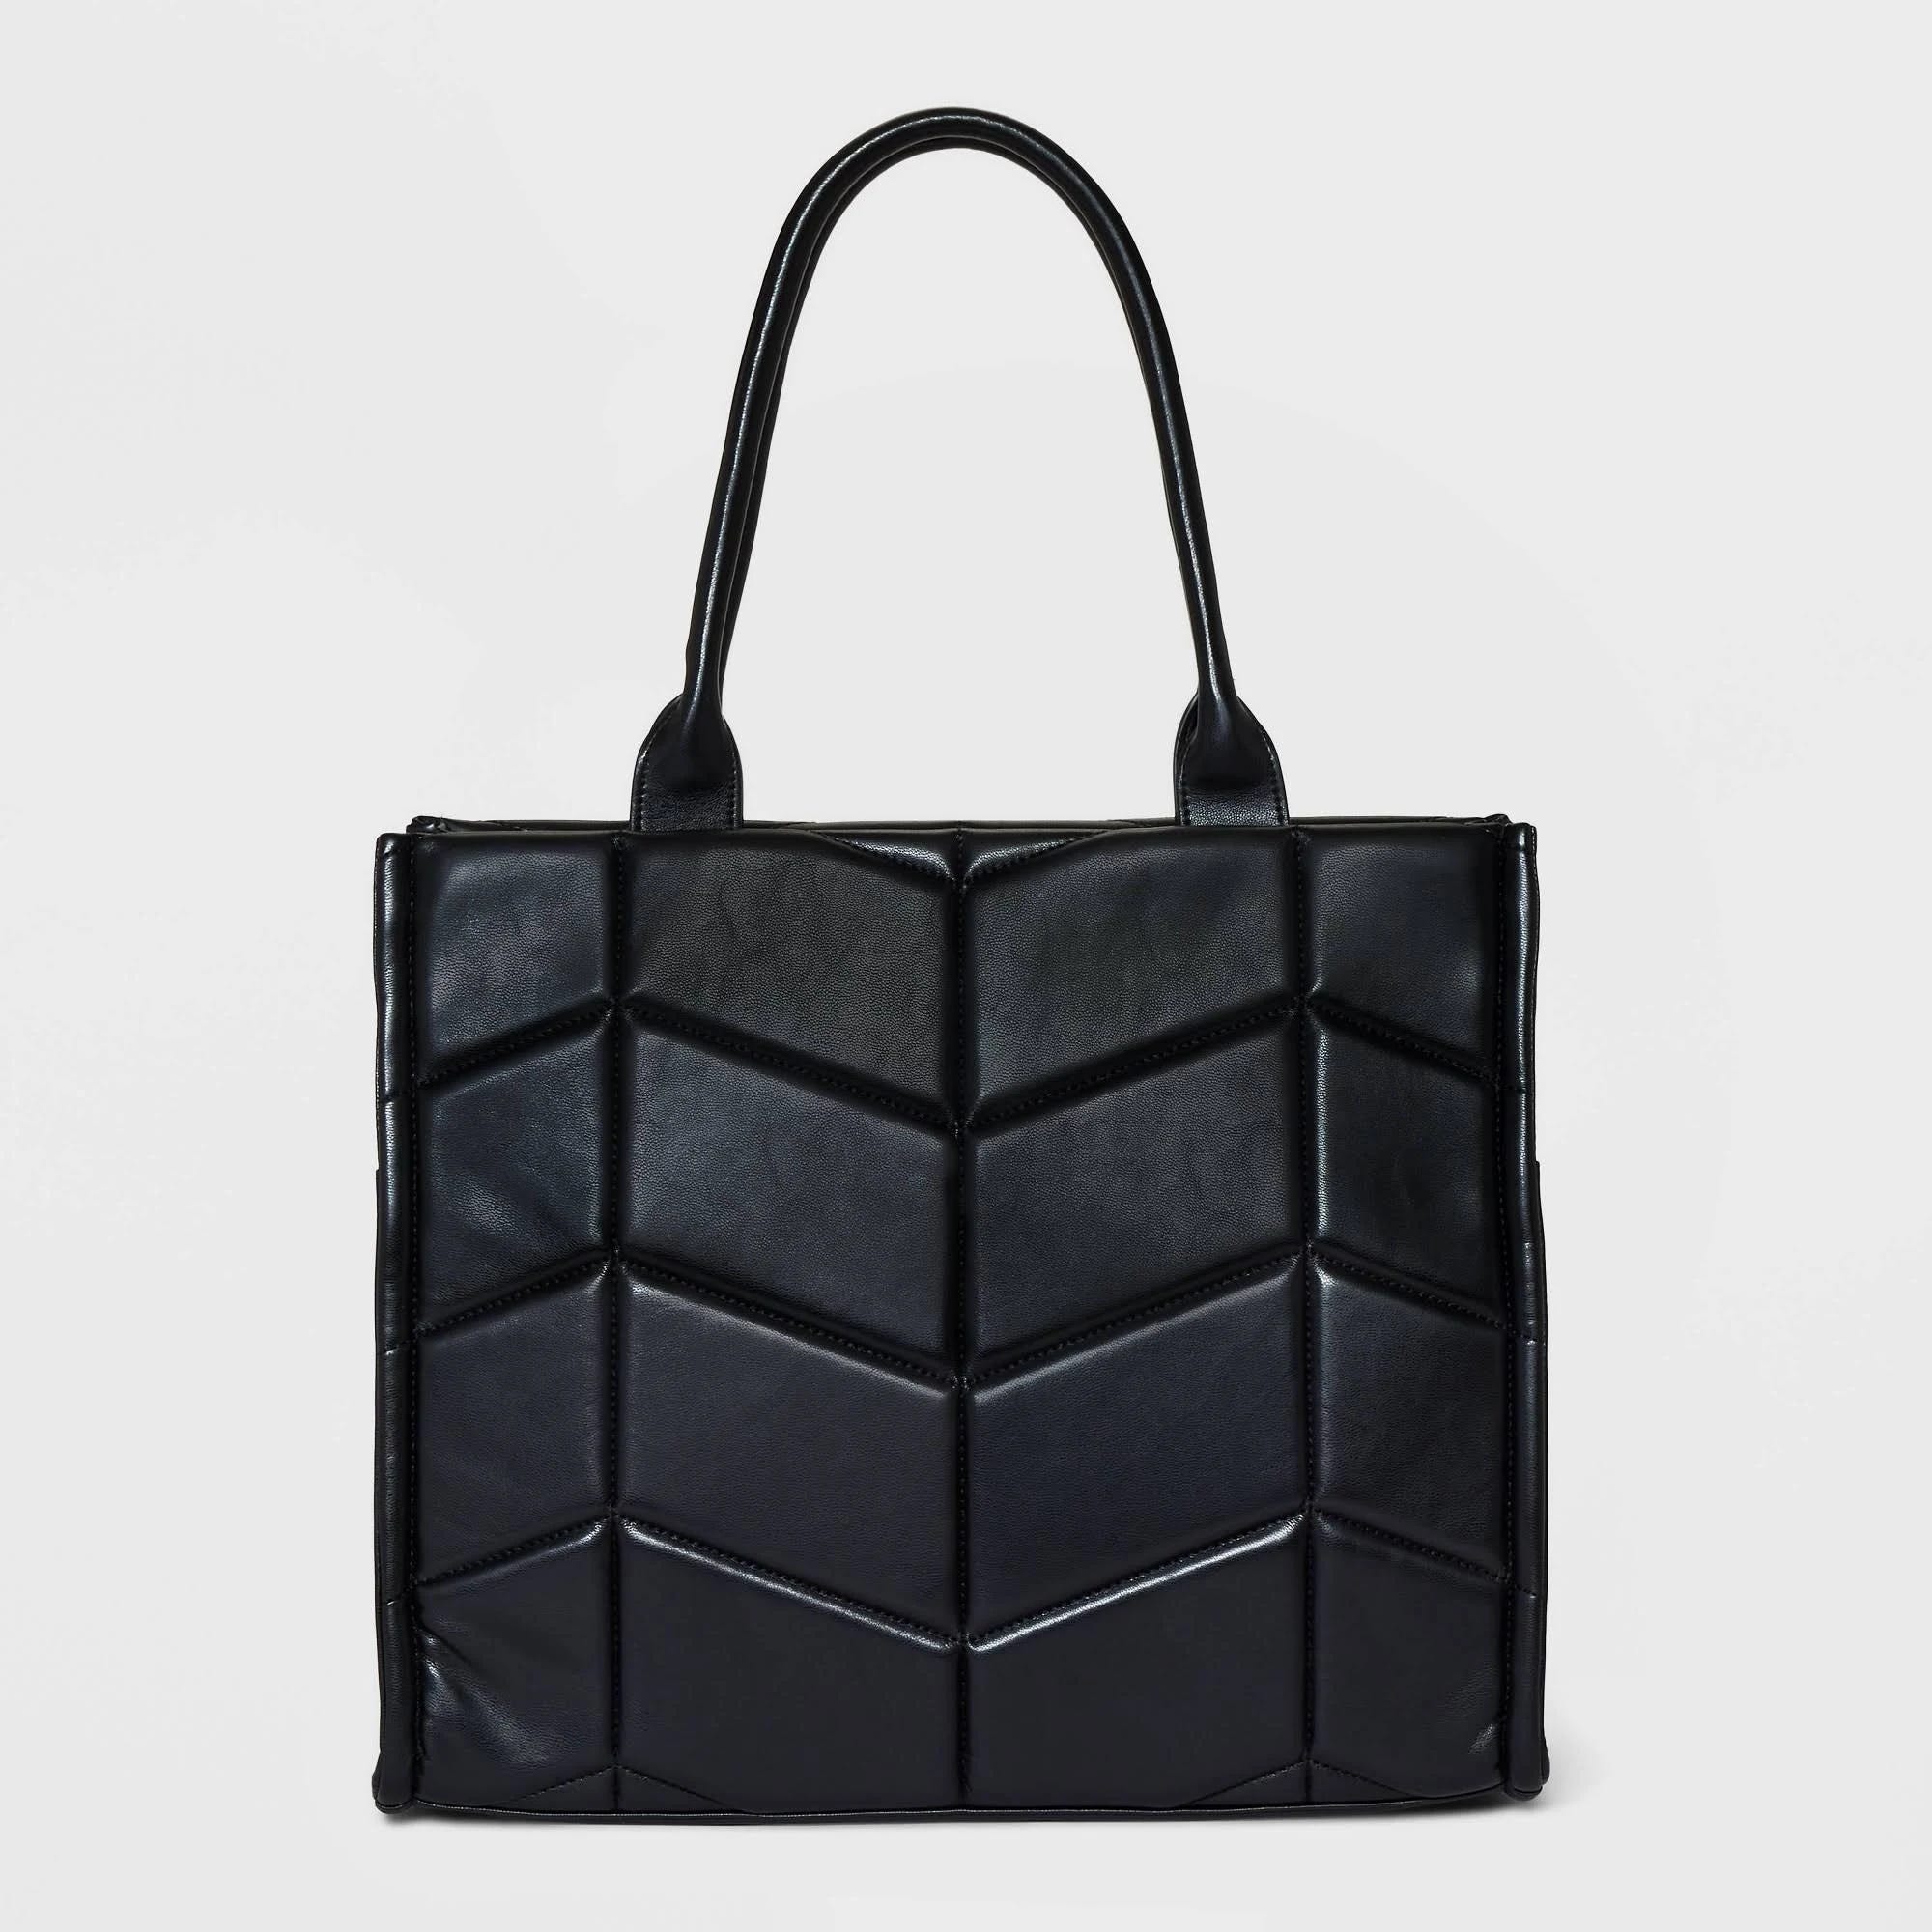 Sophisticated Boxy Tote Handbag - Unstructured Tote with Accessories Pockets | Image